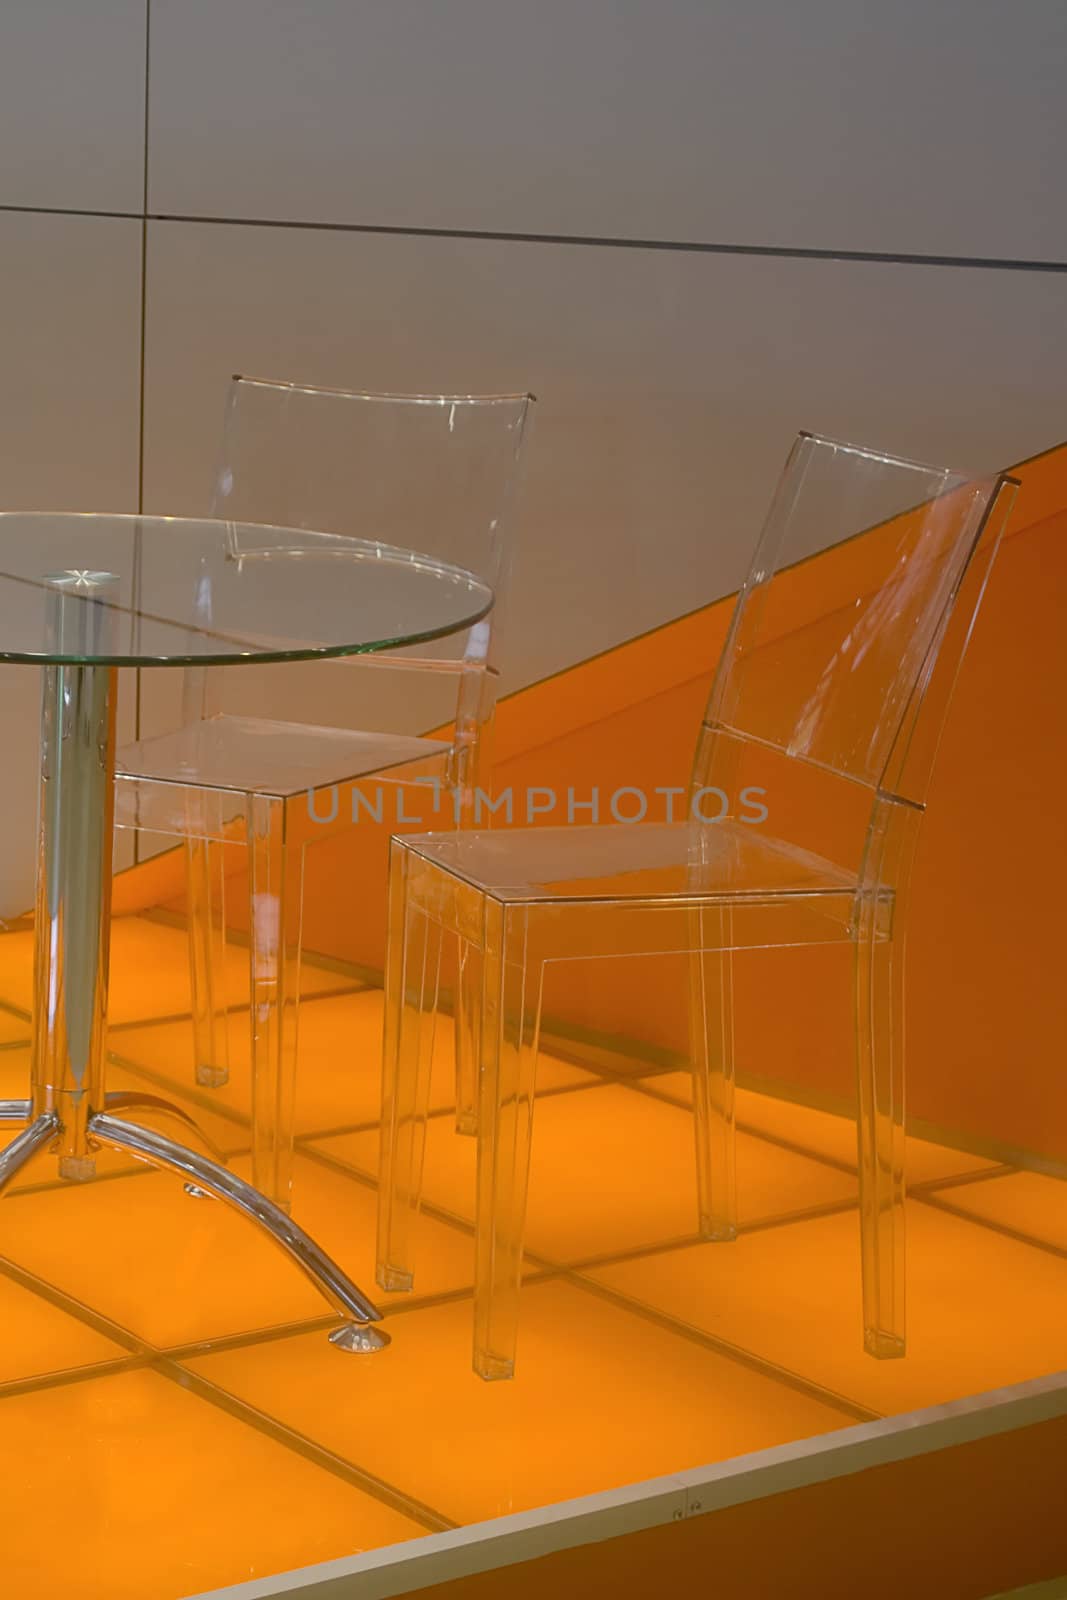 Table for negotiations, with plastic and transparent chairs.